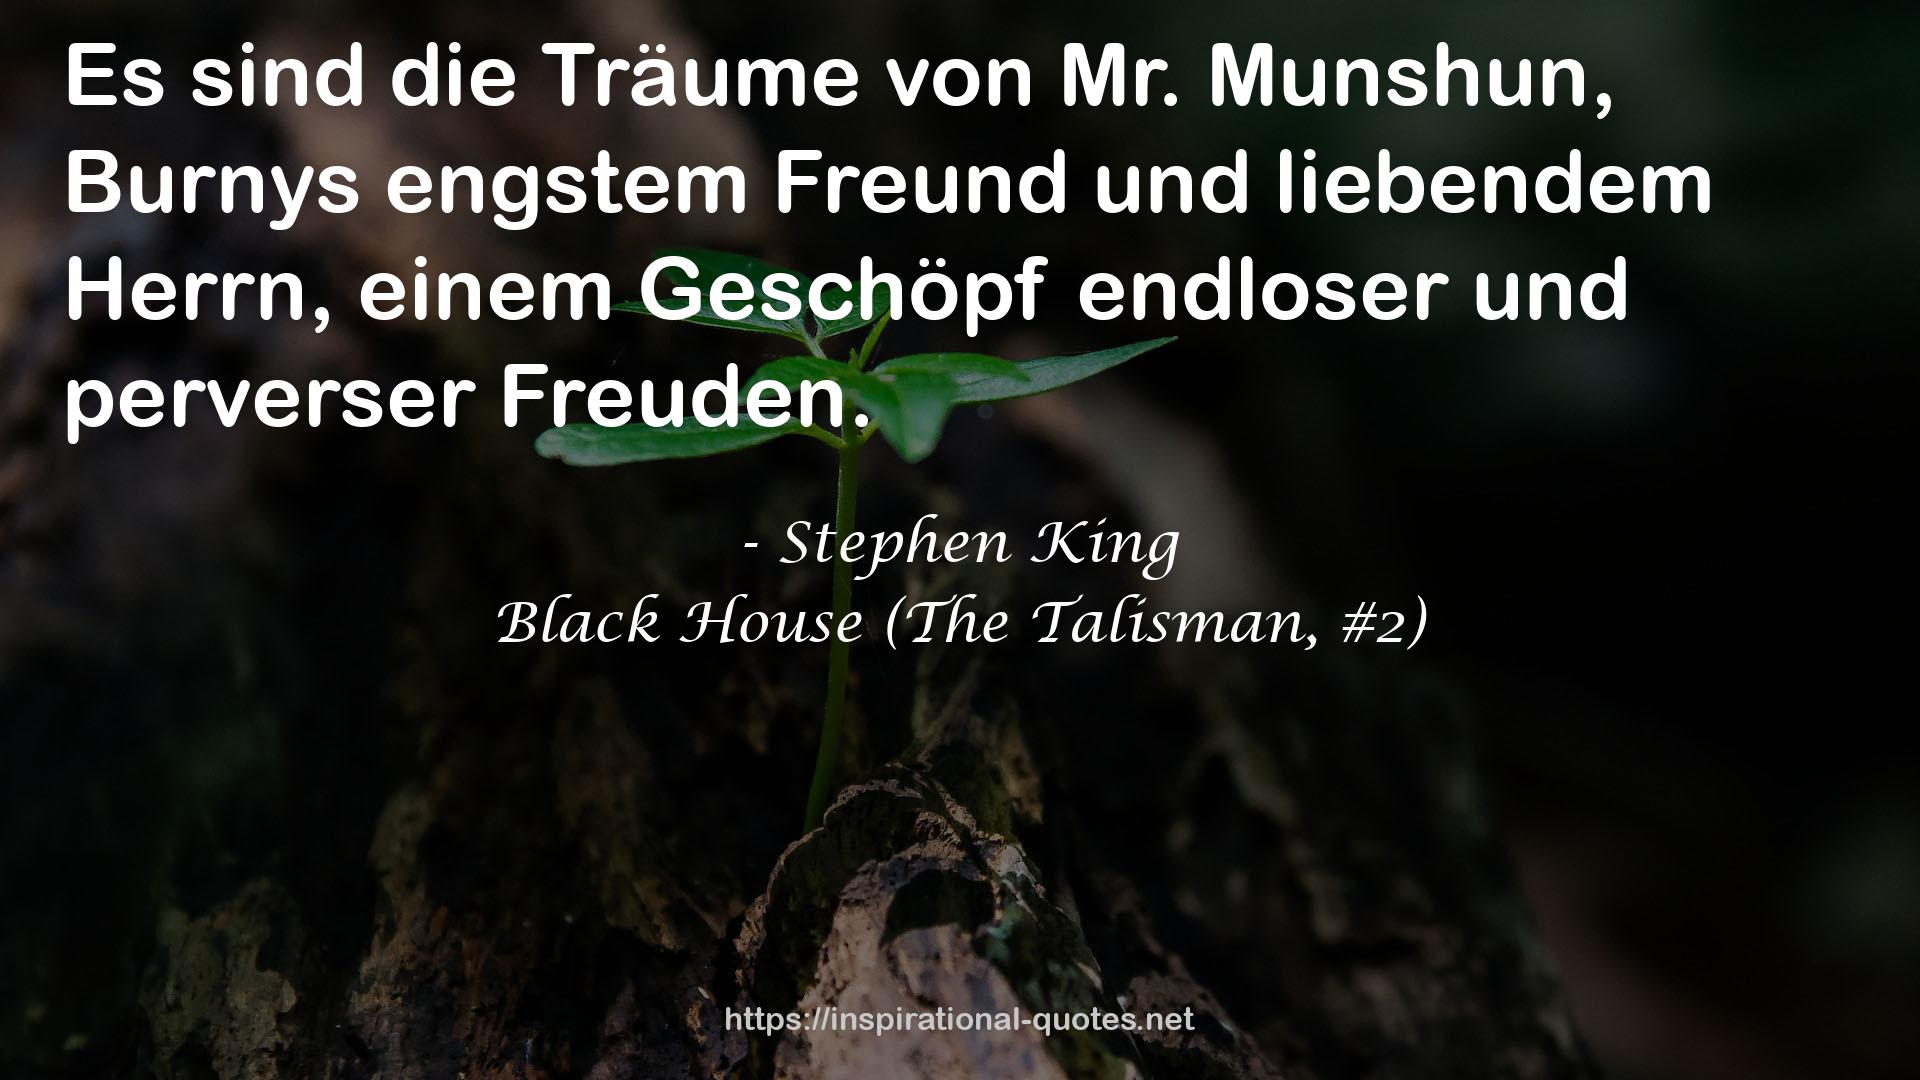 Black House (The Talisman, #2) QUOTES